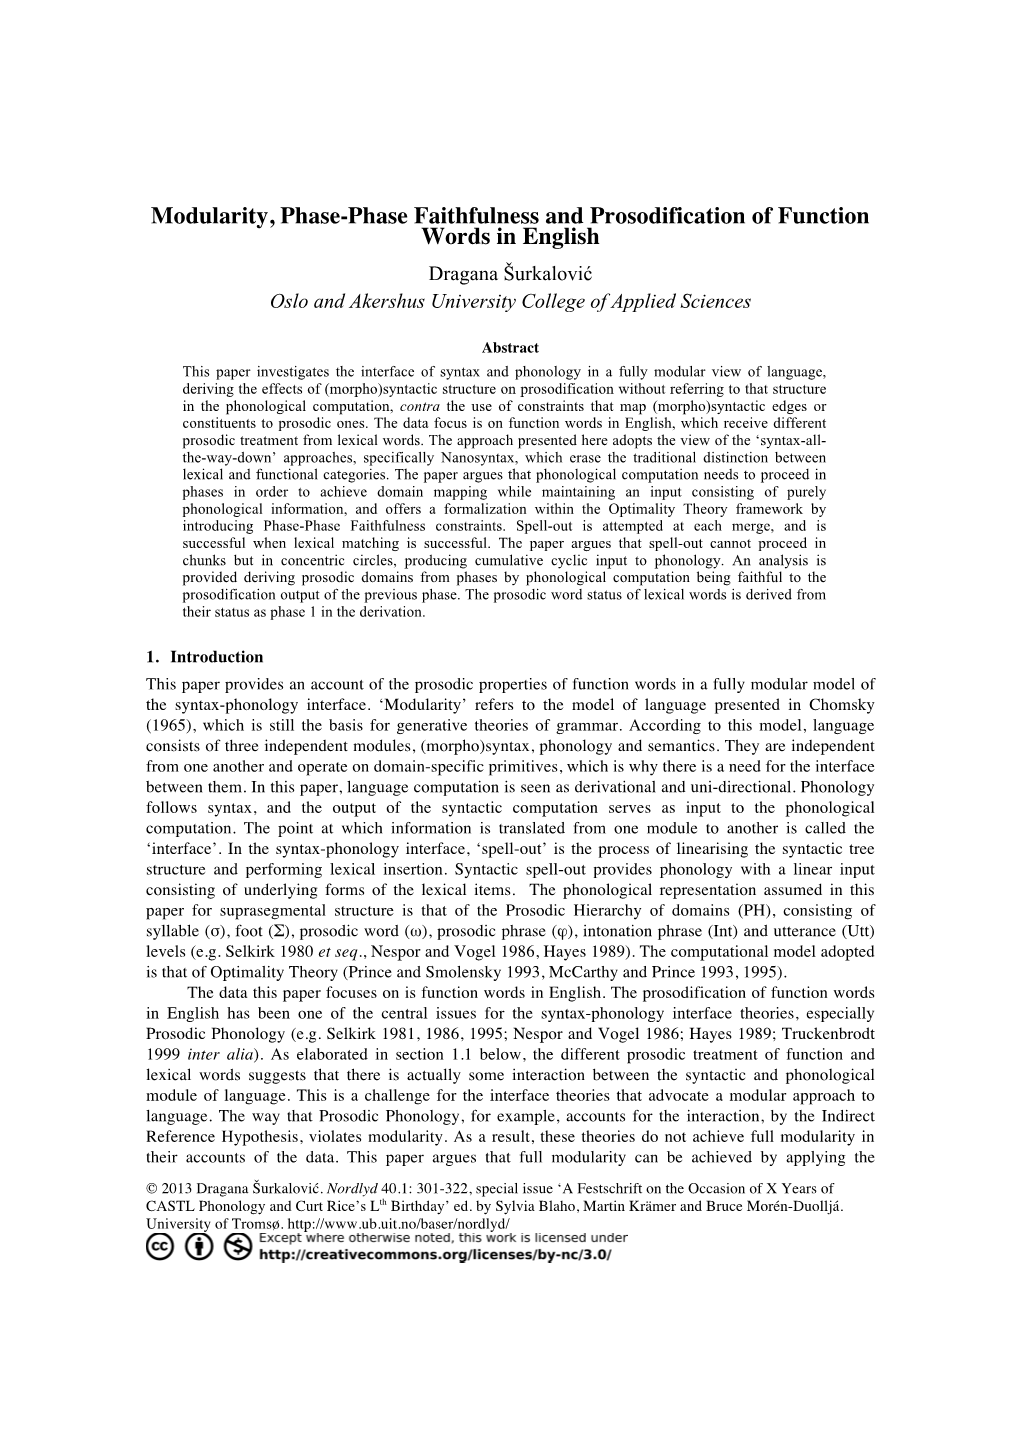 Modularity, Phase-Phase Faithfulness and Prosodification of Function Words in English Dragana Šurkalović Oslo and Akershus University College of Applied Sciences